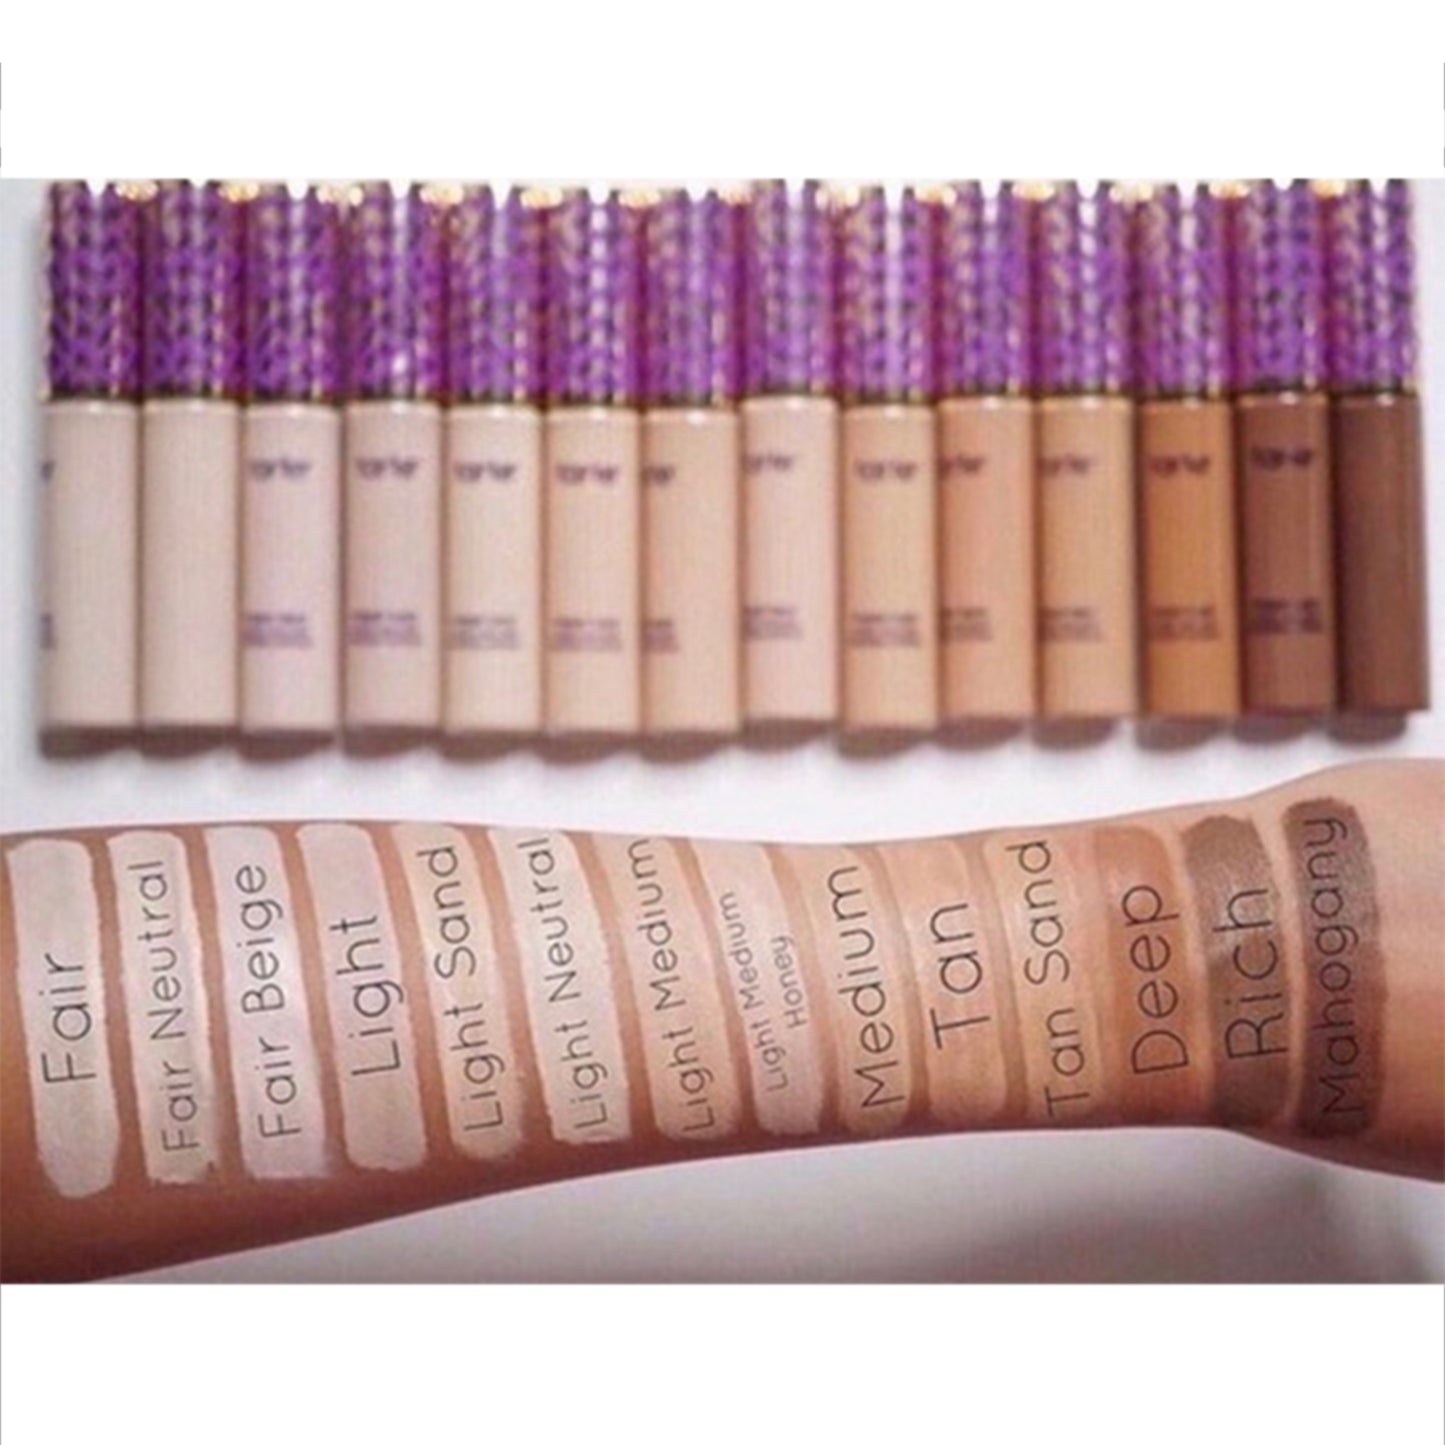 swatch image of Tarte Shape Tape Concealer Travel Size available at Heygirl.pk for delivery in Pakistan